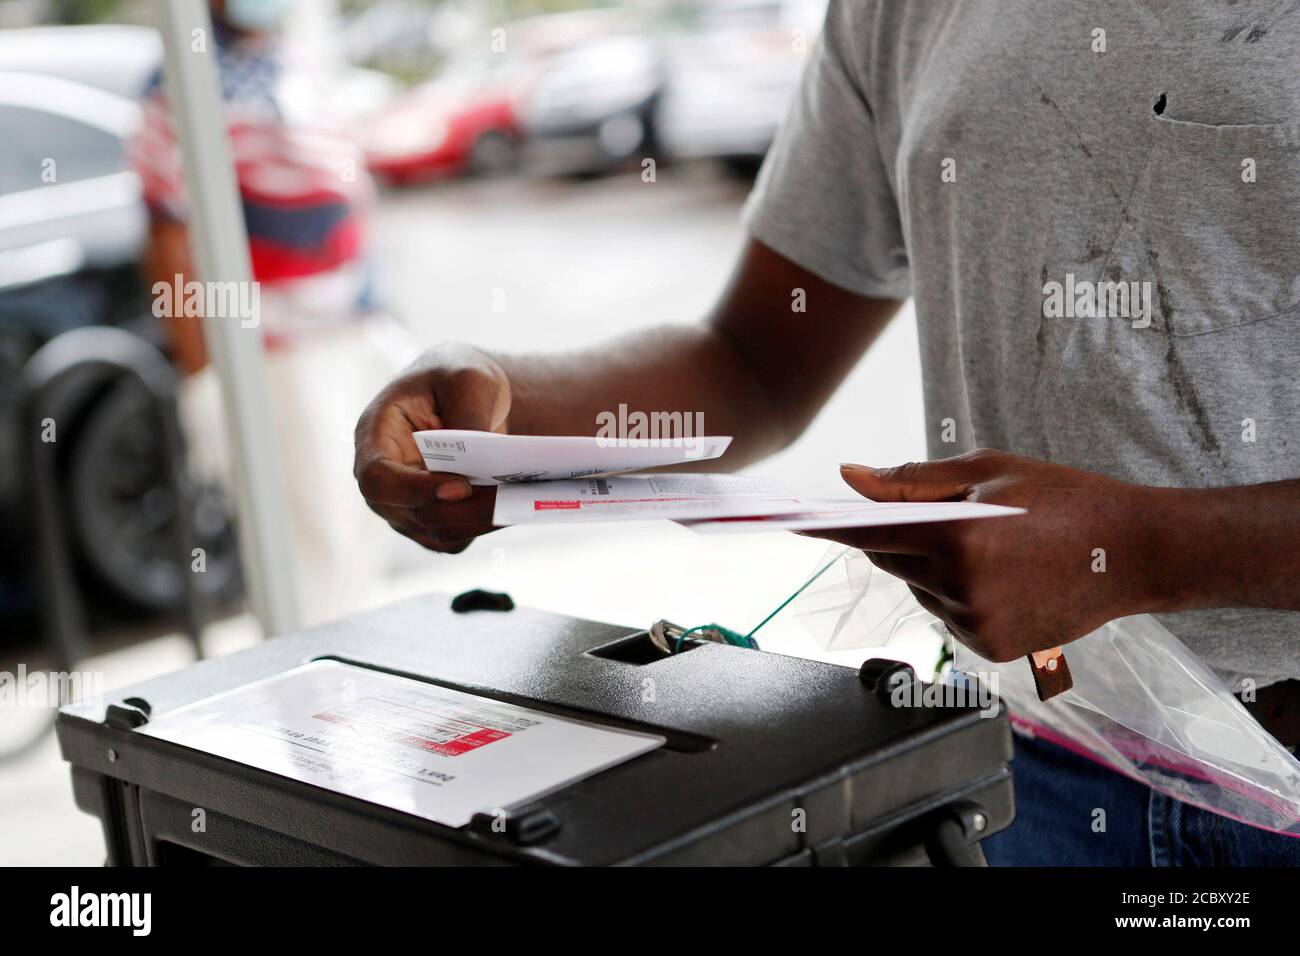 Maurice Jones prepares to cast mail-in voting ballots for his family on the last day of early voting for the U.S. presidential election at the C. Blythe Andrews, Jr. Public Library in East Tampa, Florida, U.S., August 16, 2020.  REUTERS/Octavio Jones Stock Photo